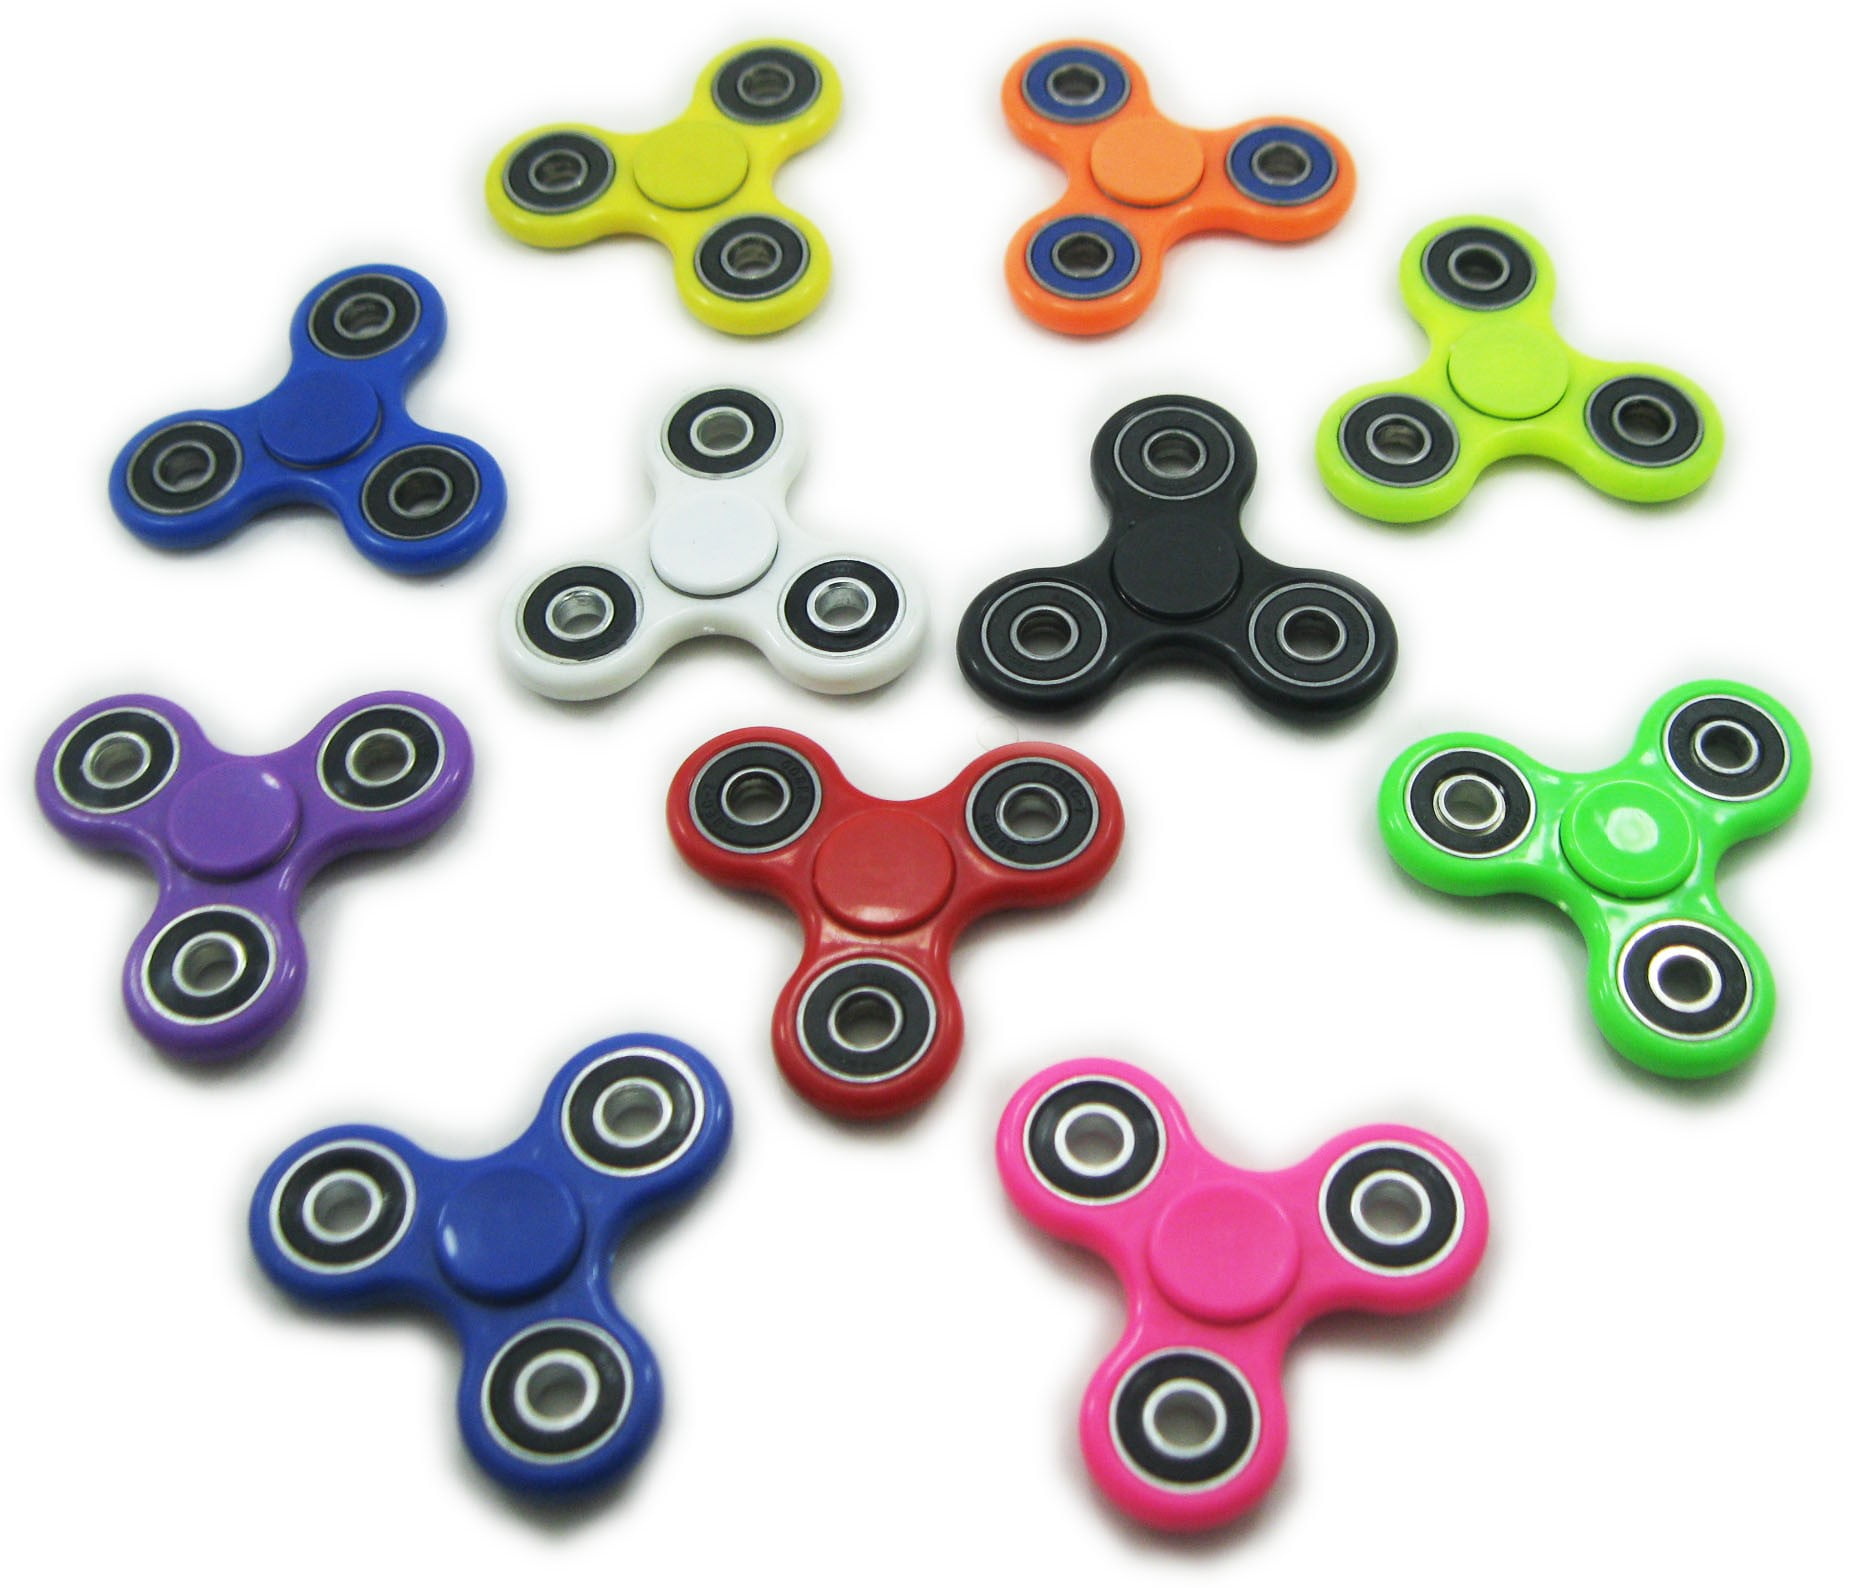 3xpcs lot hand Spinner Fidget Toy EDC Focus For Autism and ADHD camo colors Gift 